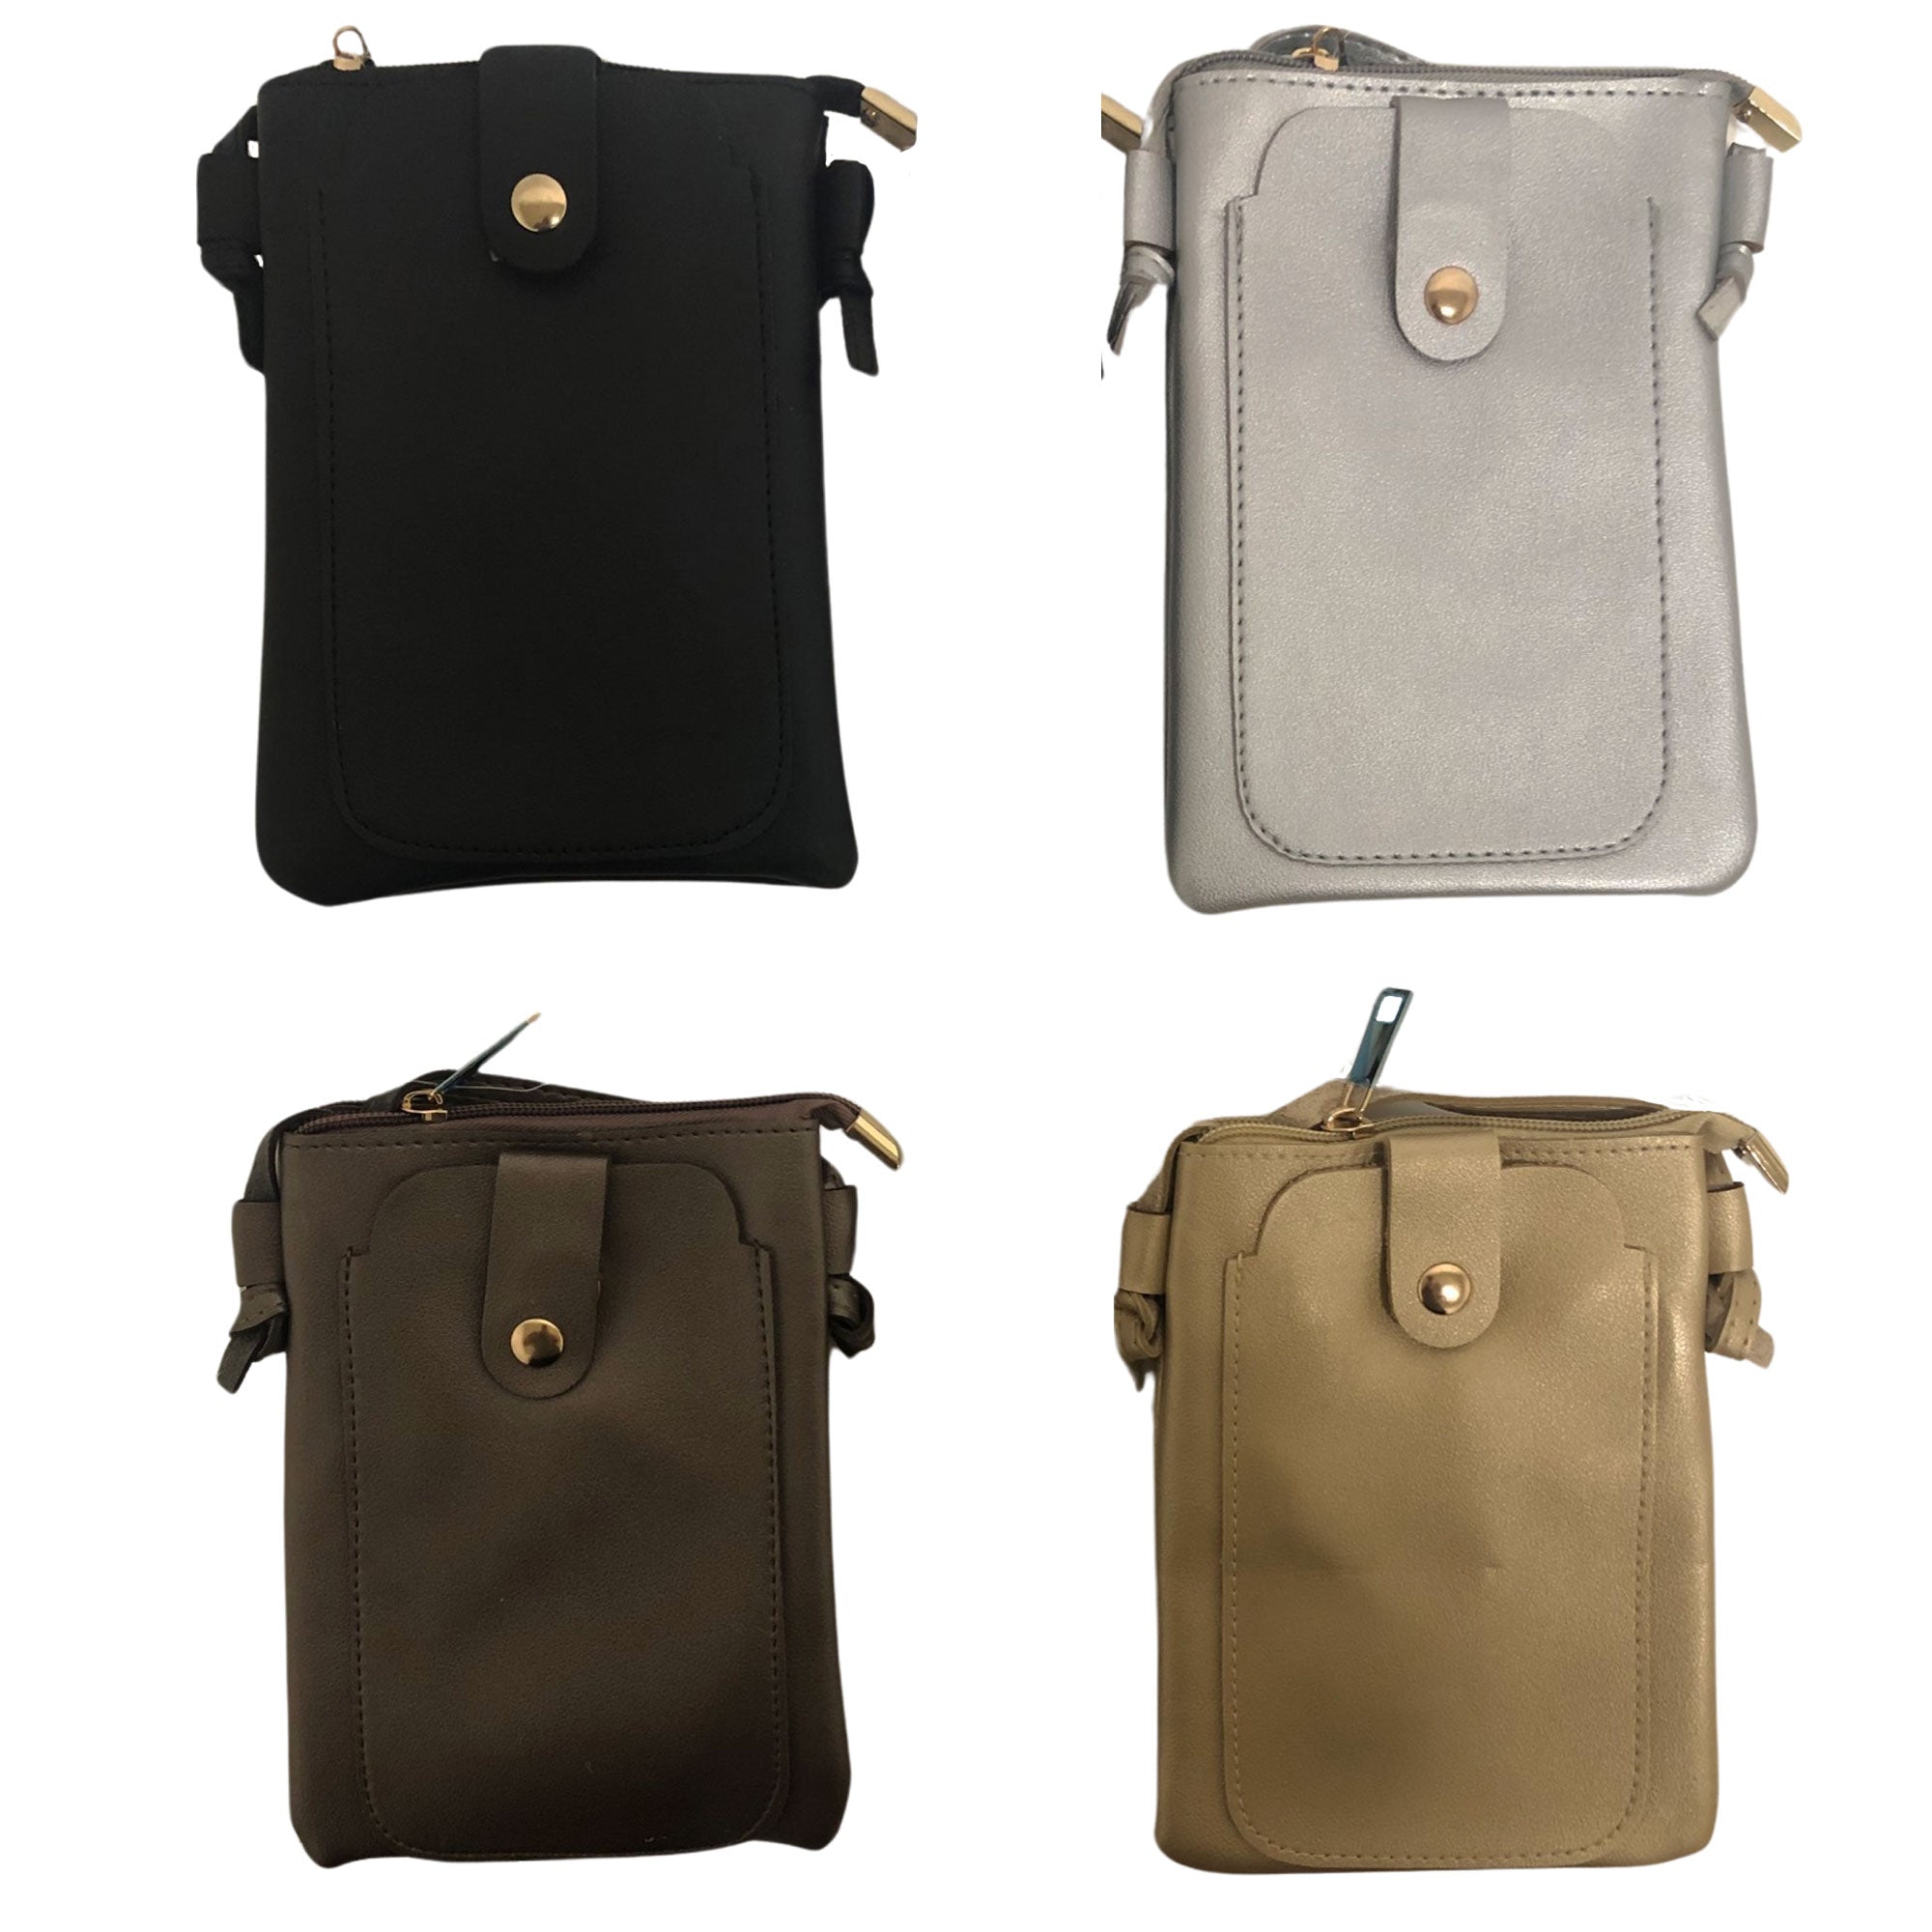 CLEARANCE CROSSBODY BAG FOR WOMEN (CASE OF 48 - $1.75 / PIECE)  Wholesale Crossbody Phone Bag in Assorted Colors SKU: M192-MET-48